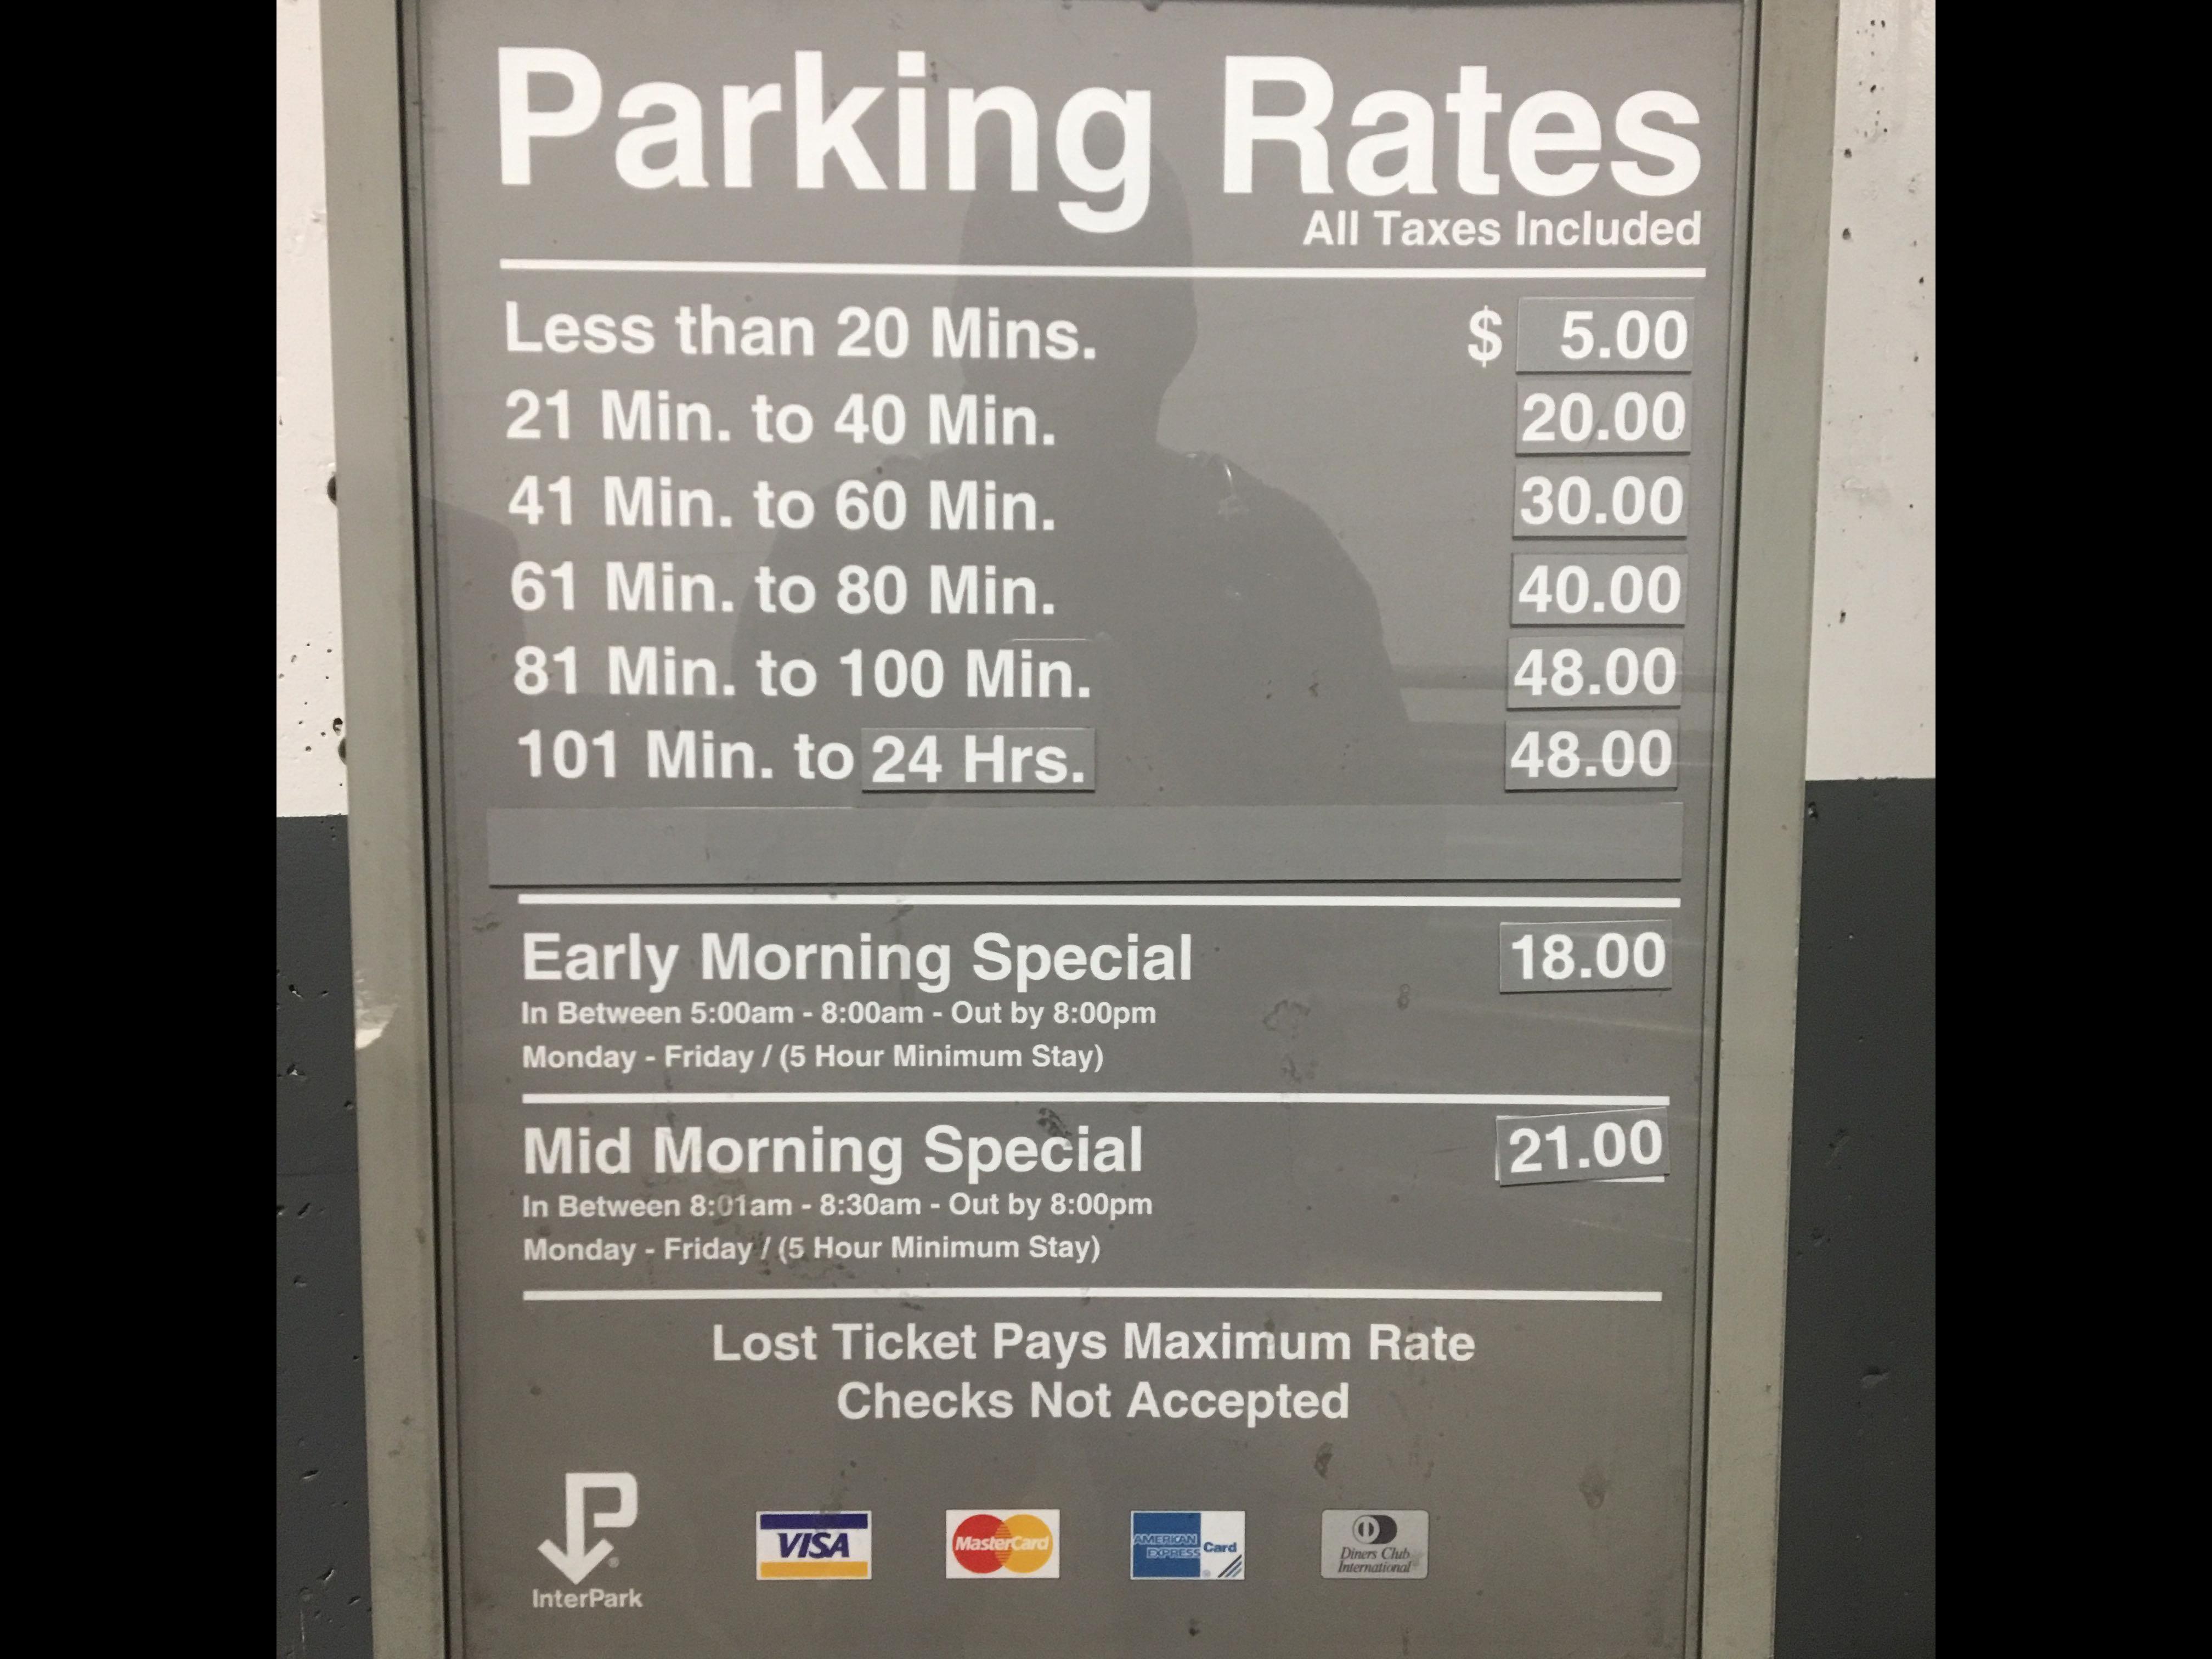 The Ultimate Guide to Parking in Chicago: Parking Rates, Reservations